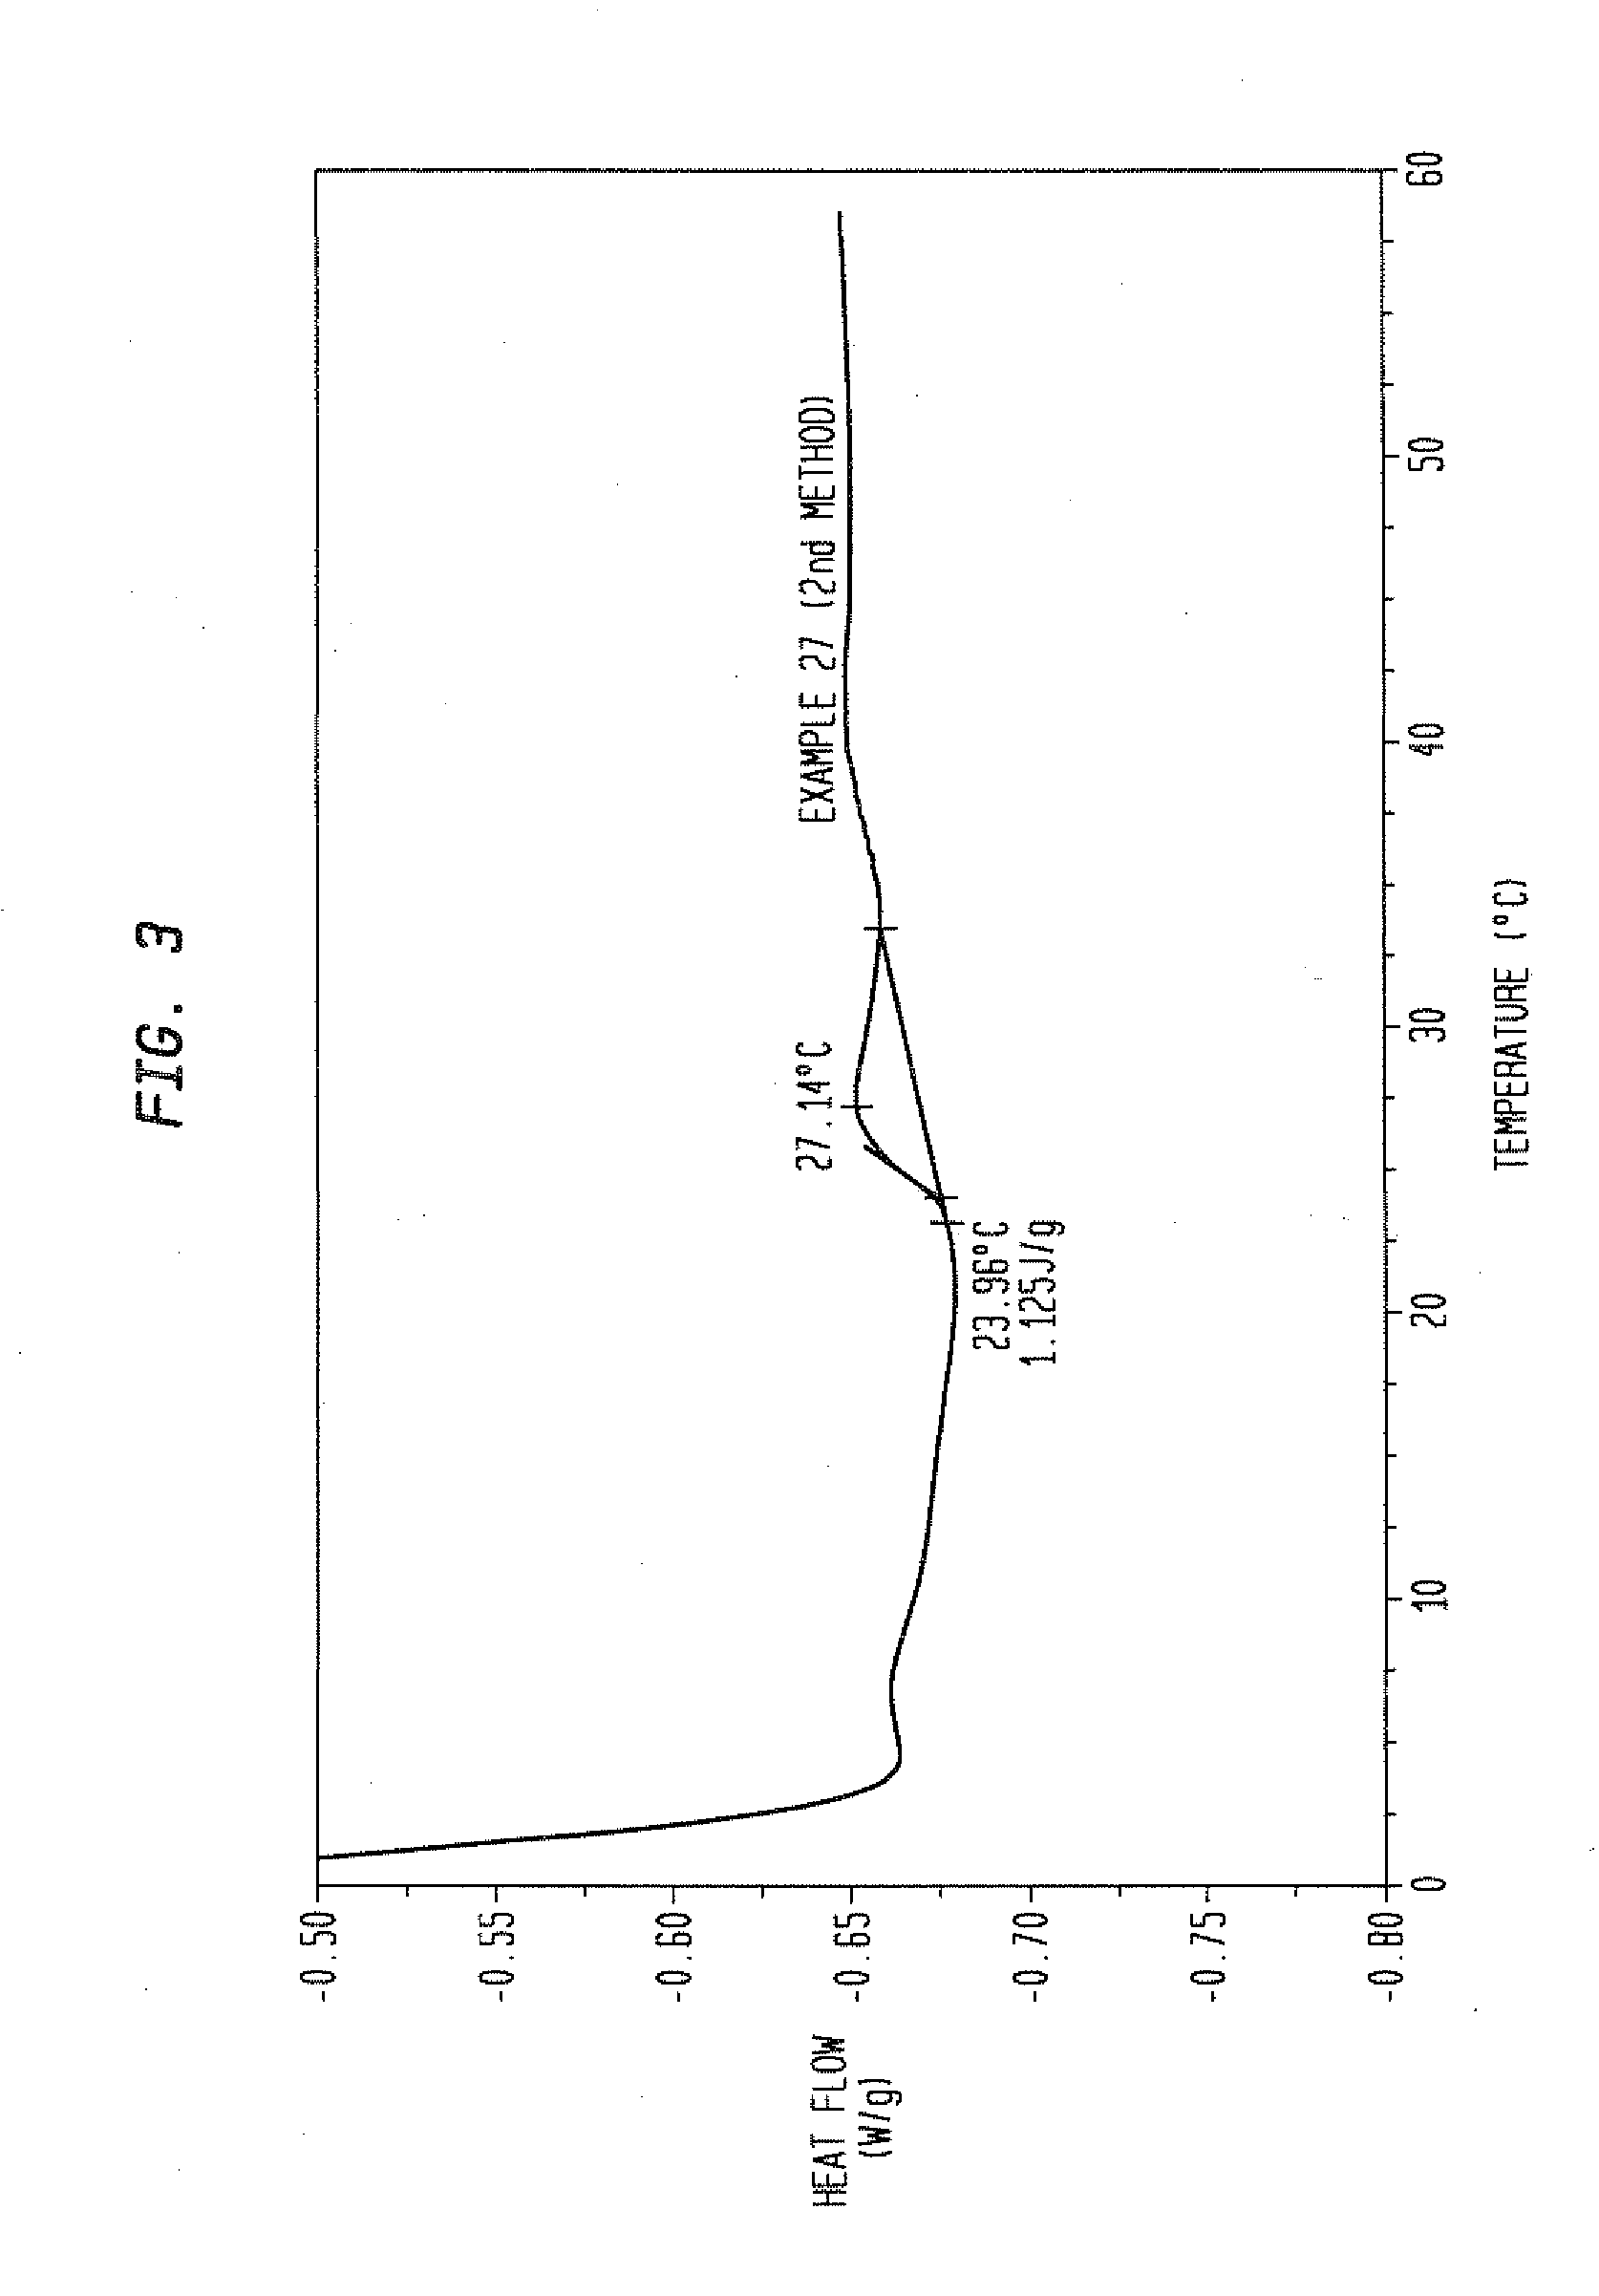 Stable liquid cleansing compositions comprising fatty acyl isethionate surfactant products with high fatty acid content